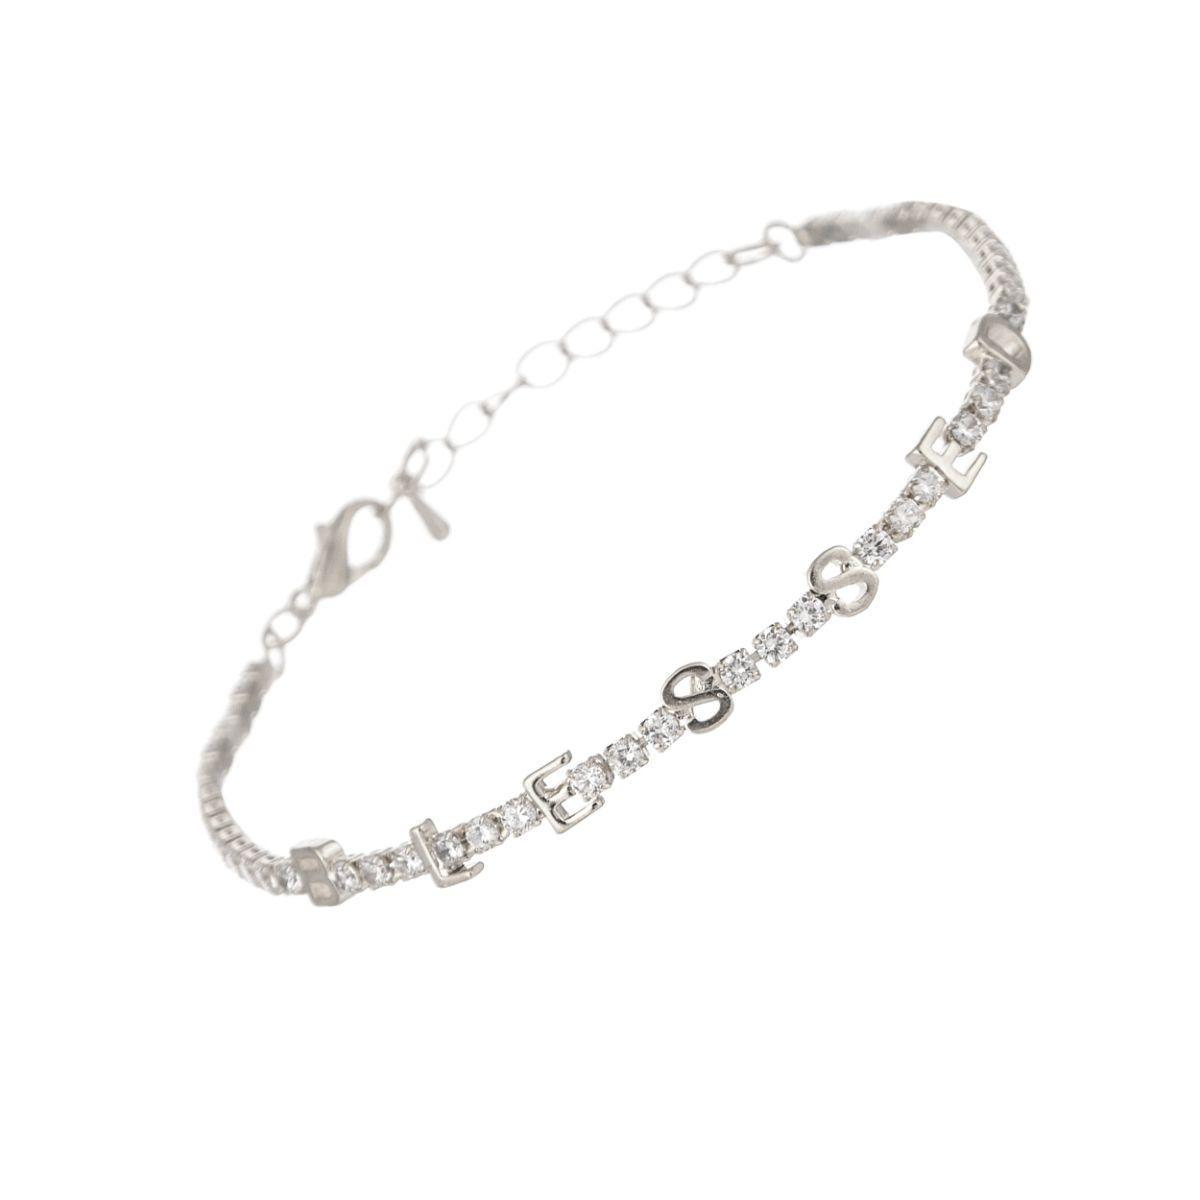 Enhances Your Favorite Outfits BLESSED Tennis Bracelet Silver Plated